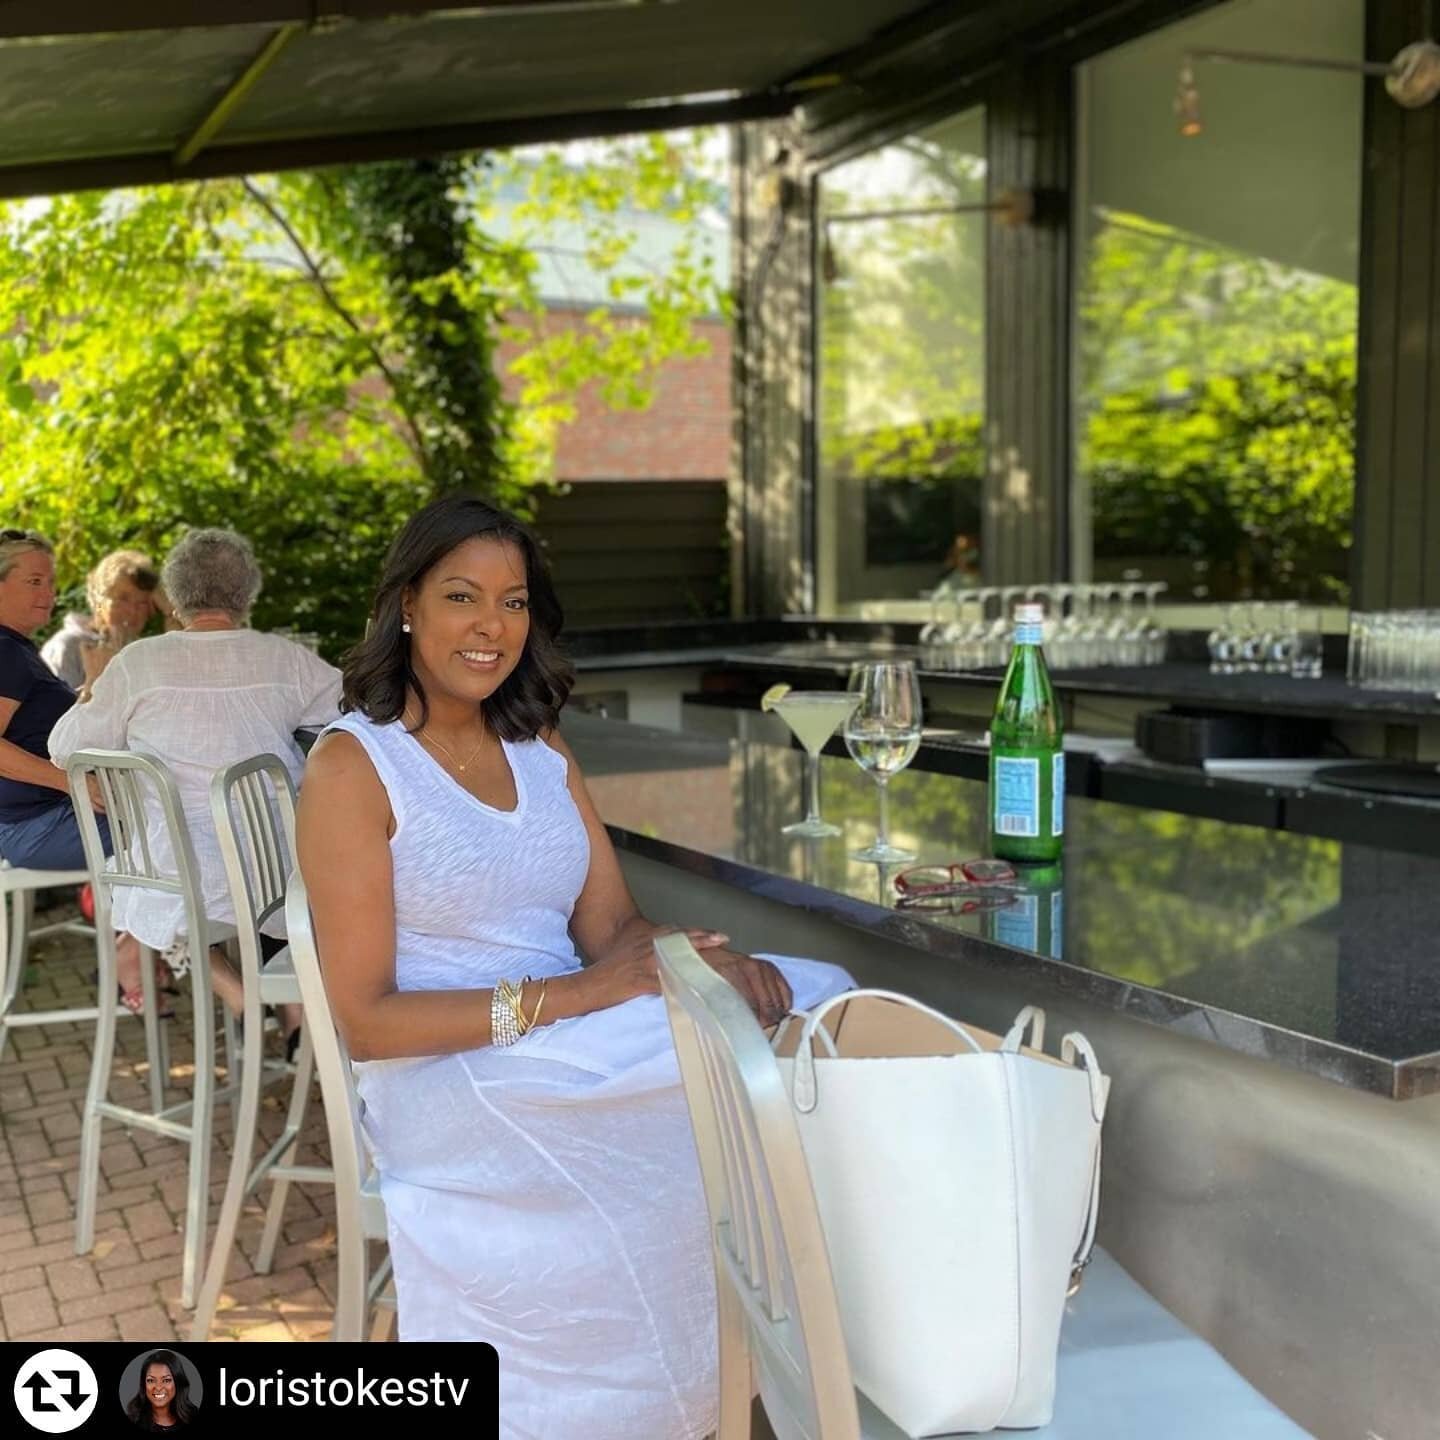 Always good to have you in, Lori! 
#Repost - @loristokestv
Happy Saturday ... treated myself to a night out 😊

📷 @sarahspittler